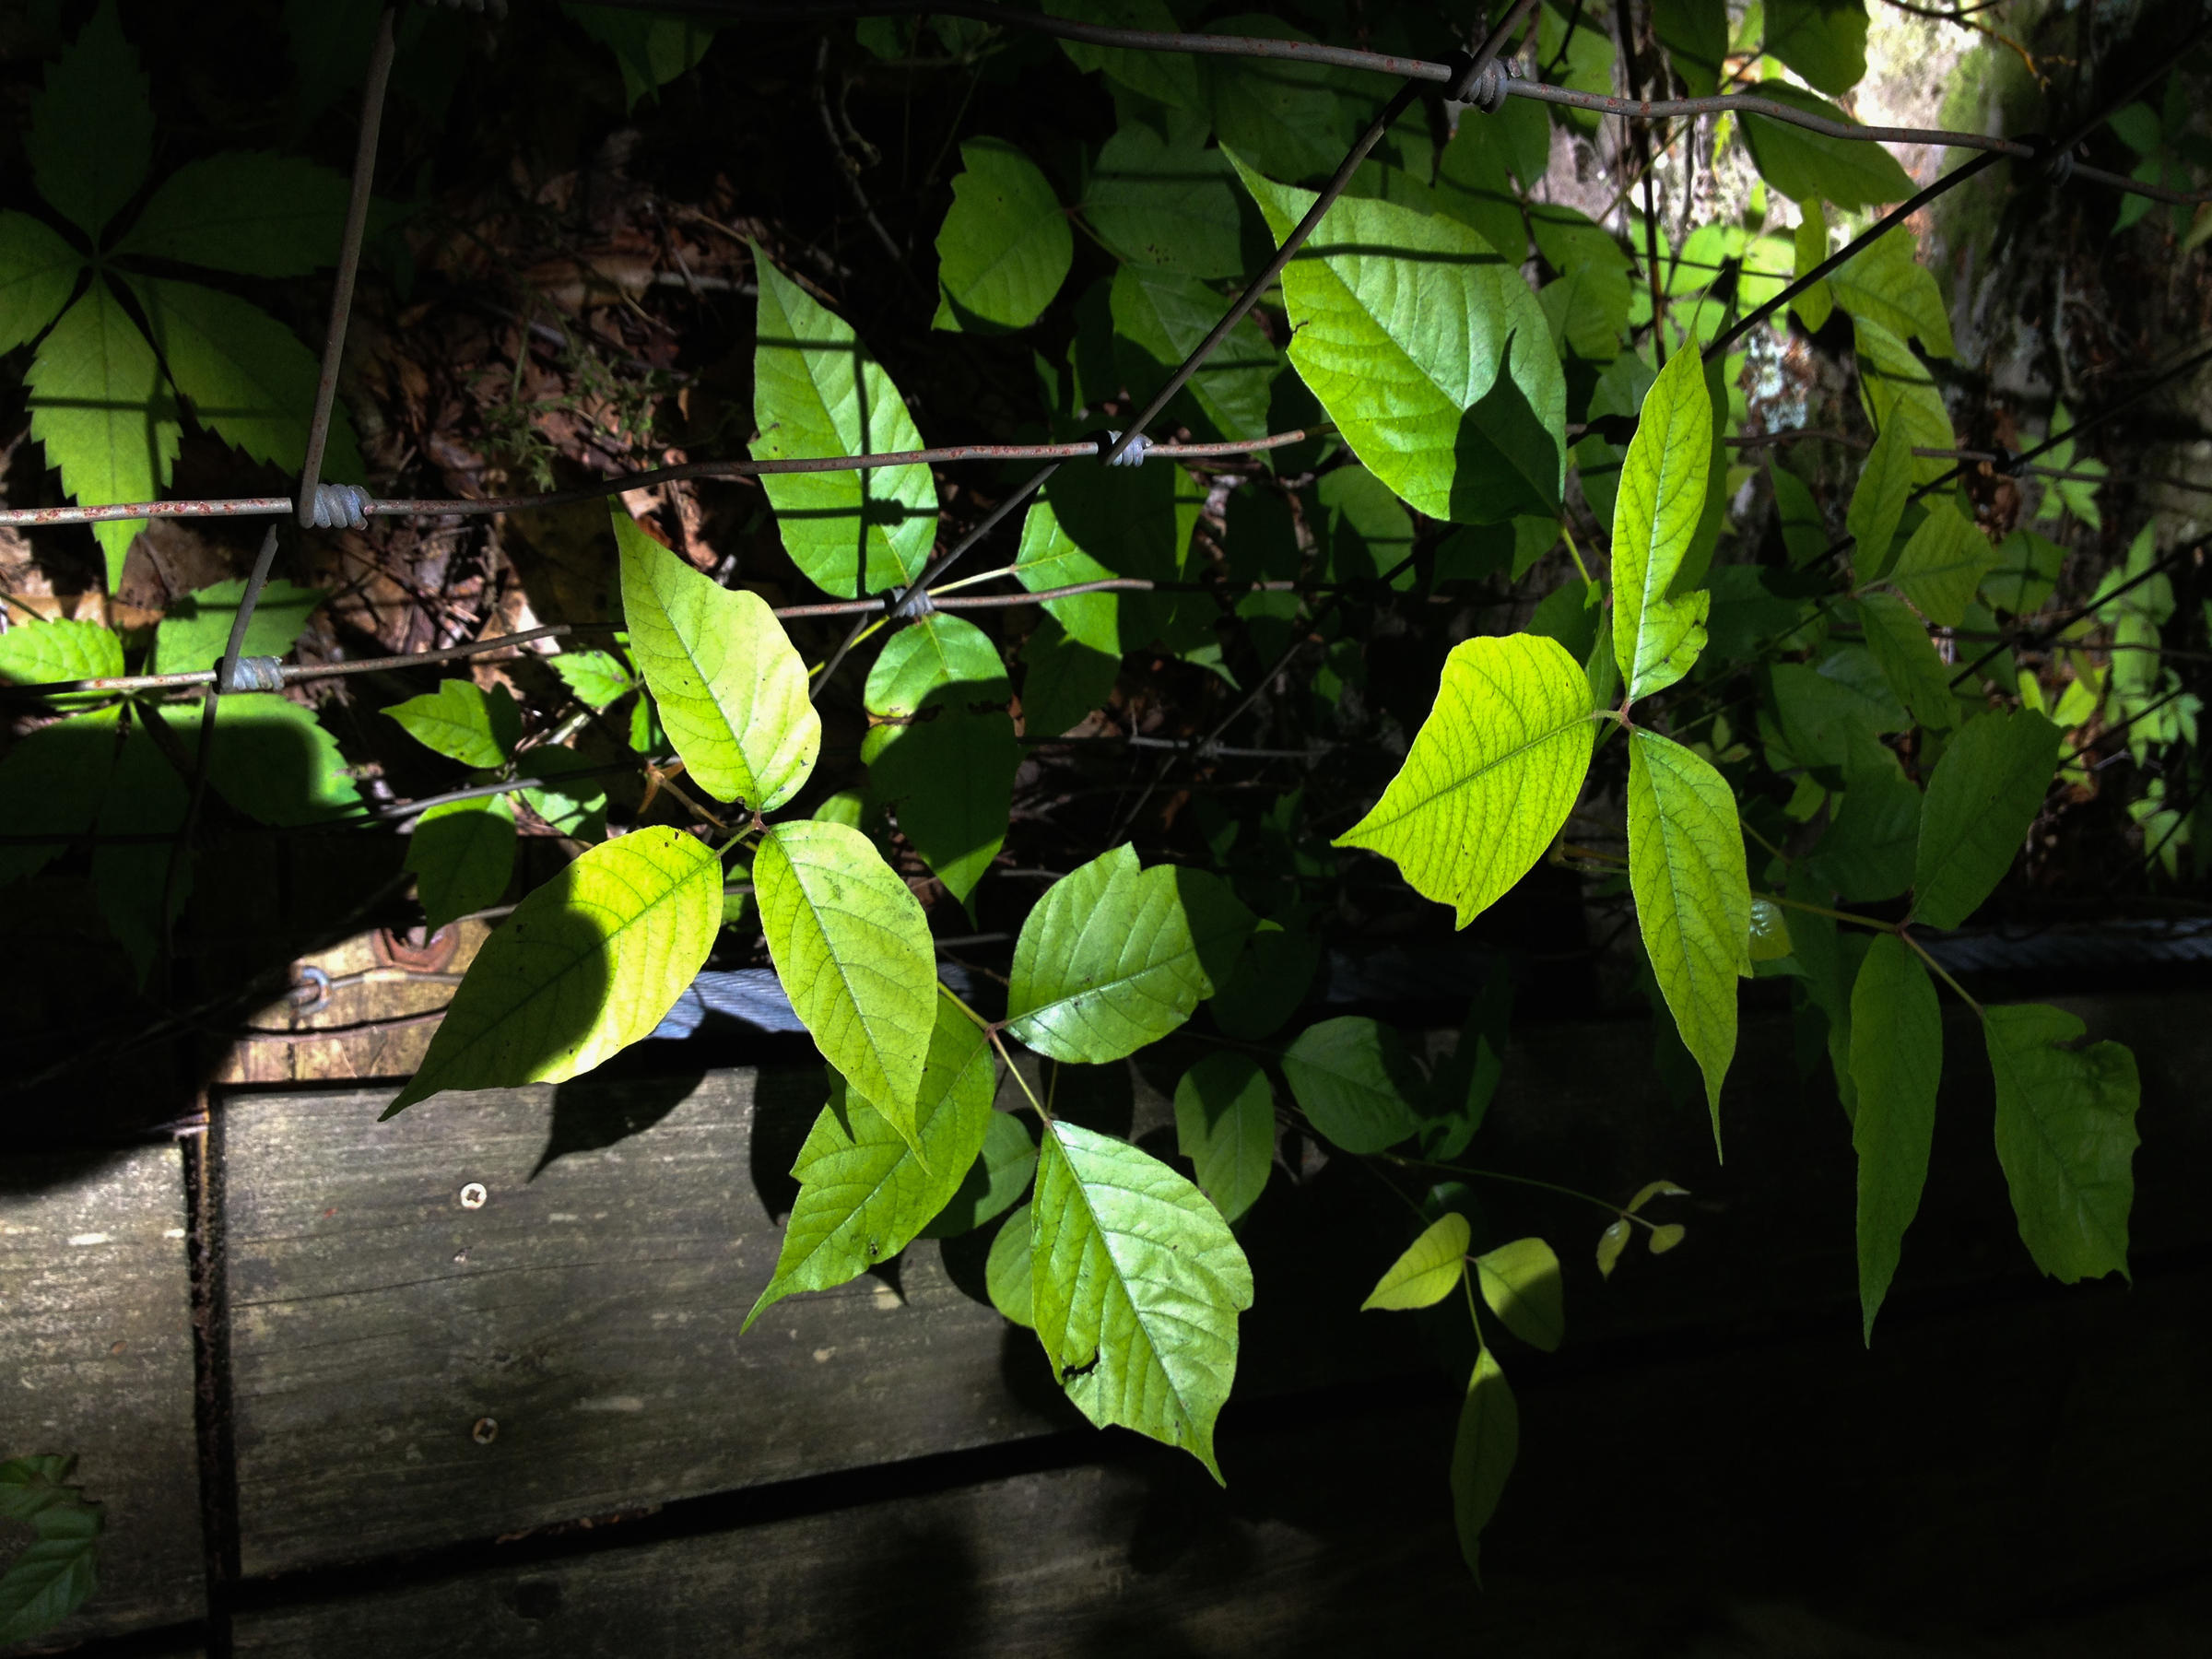 Don't Touch! A Scientist's Advice For Spotting Poison Ivy Before It